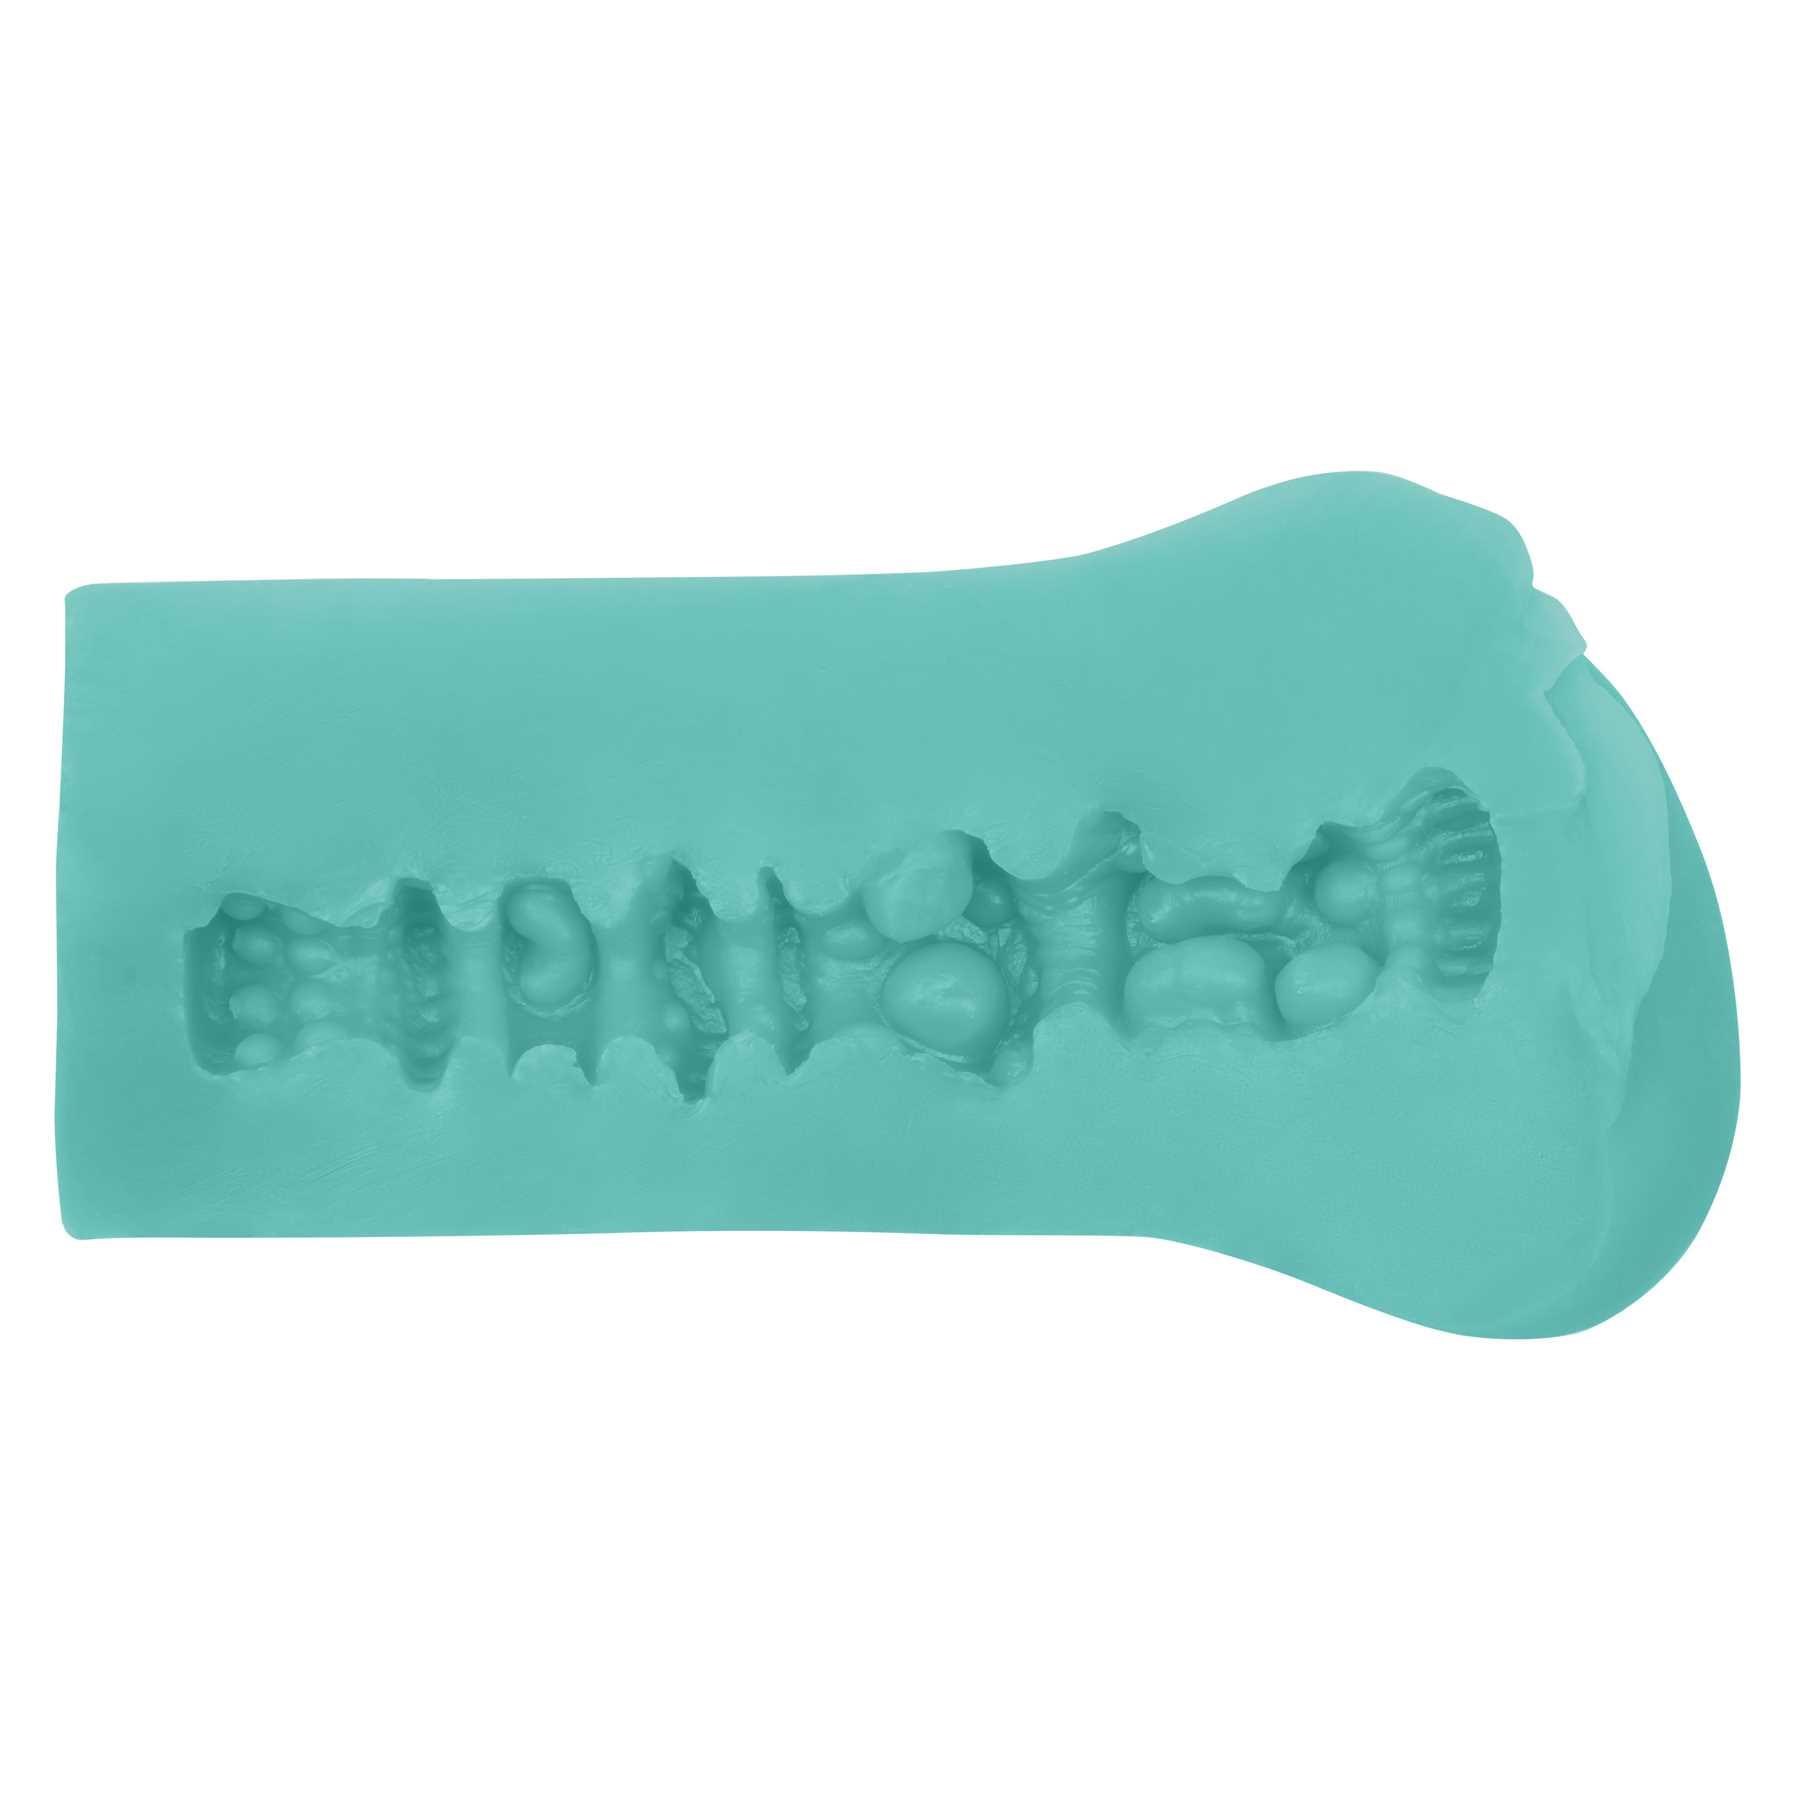 Cheap Thrills the Mermaid Stroker cross section of textured tunnel